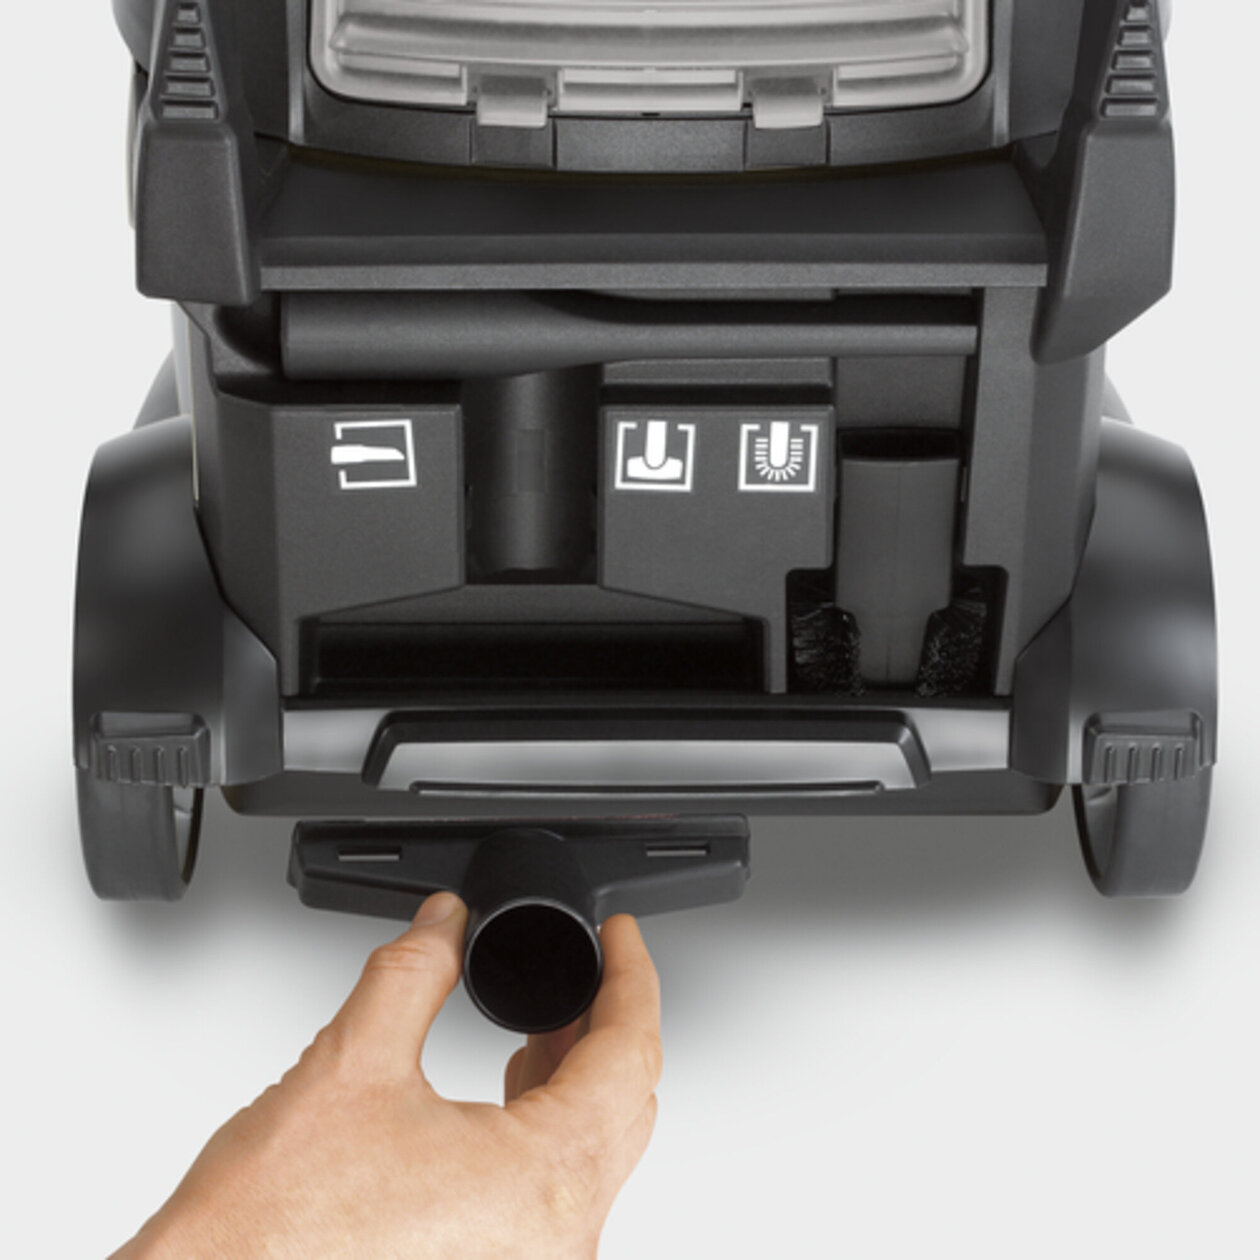 Dry vacuum cleaner T 15/1 CUL: Integrated accessory storage